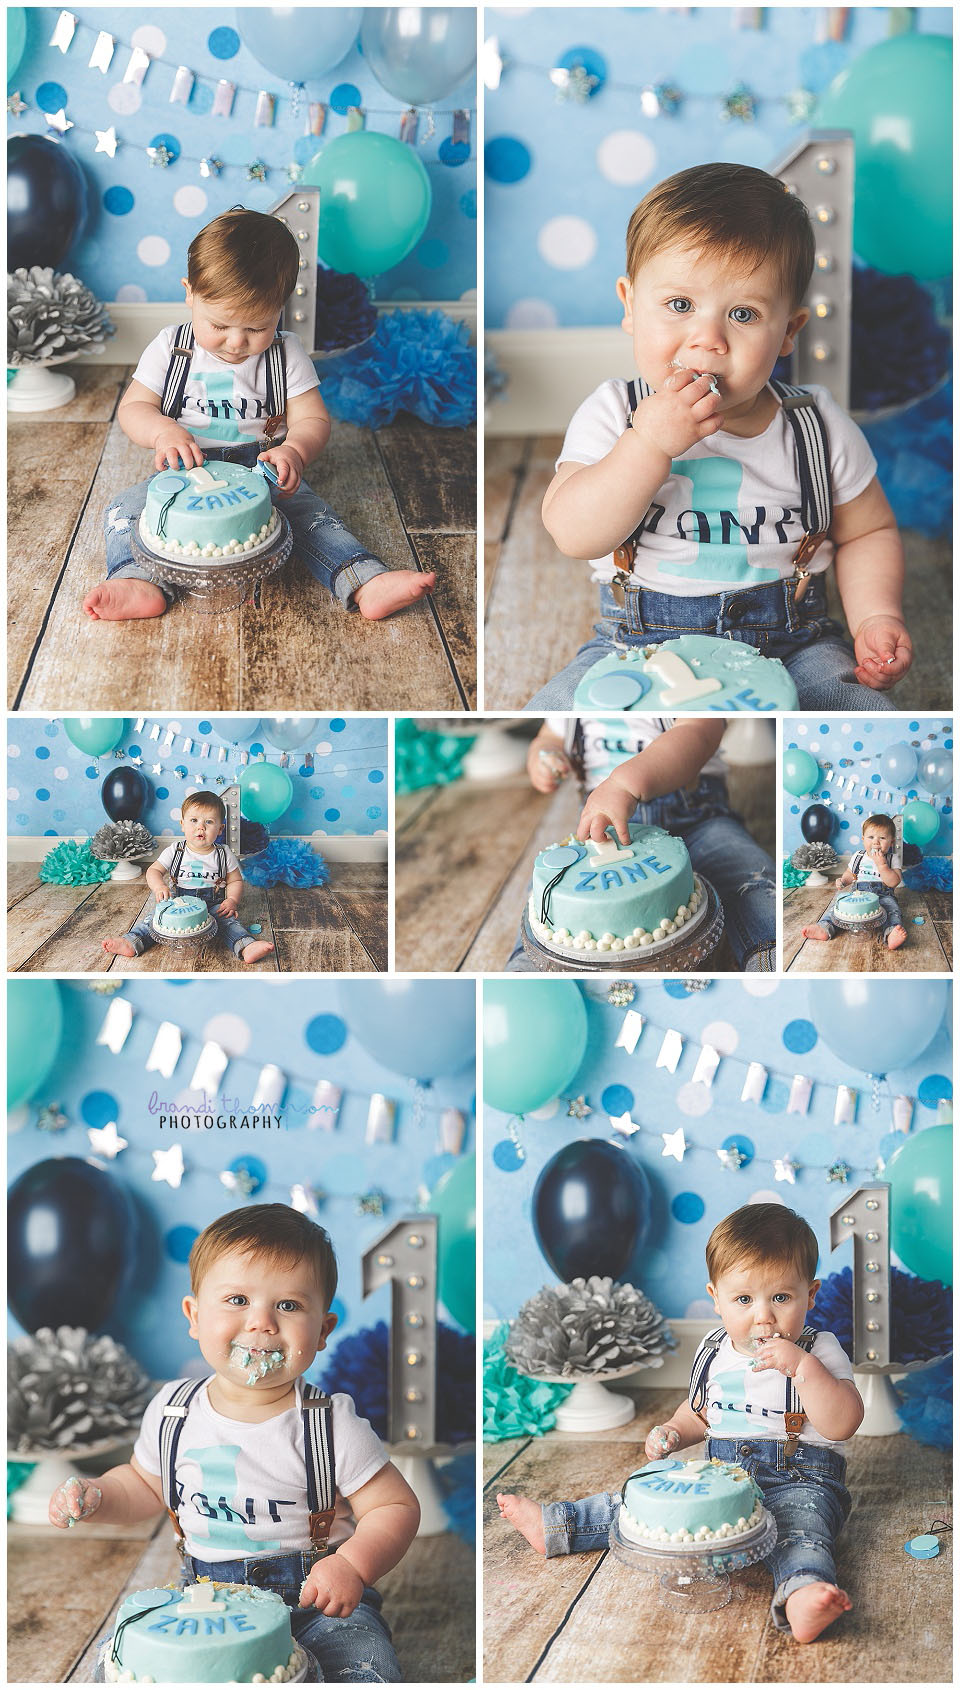 indoor photography studio cake smash for baby boy first birthday with various shades of blue